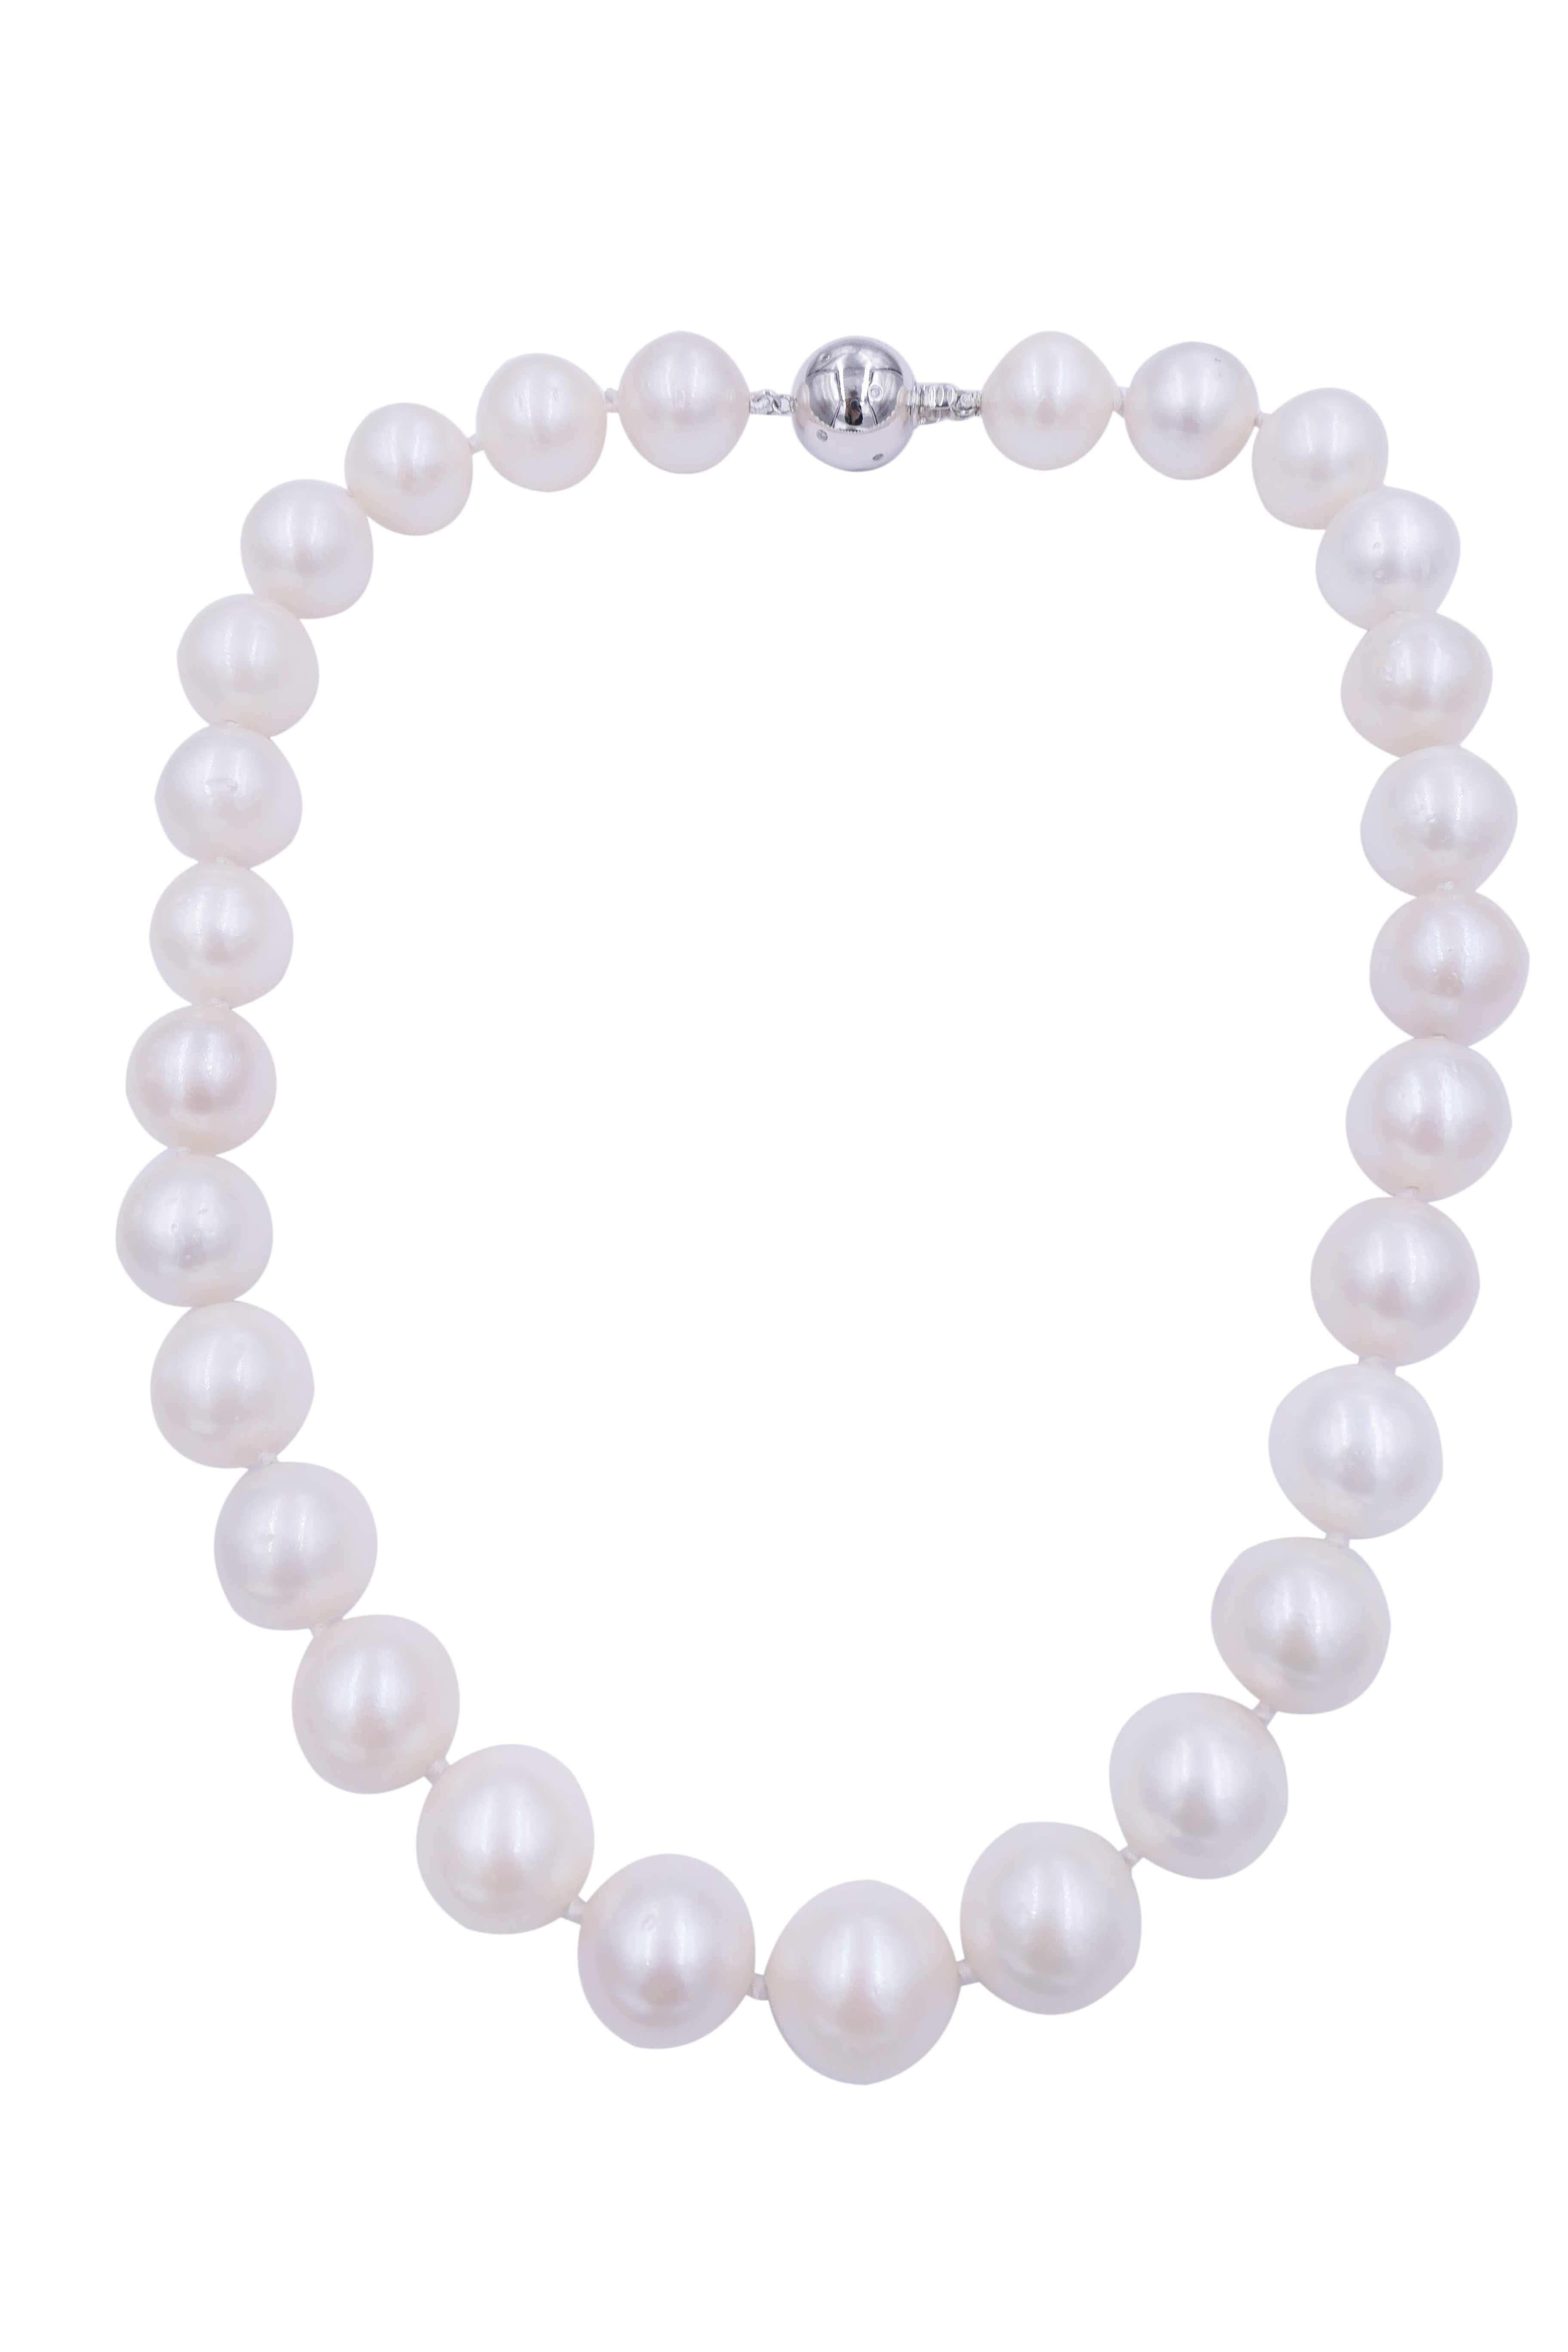 18K White Gold Clasp
0.15 cts Diamonds 
South Sea Pearls with Amazing Luster, Color and Shine - White with Slightly Cream Hue & Overtones - A Quality - 13-14 MM Sizes
17 Inches Length
High-Quality Pearls + Make